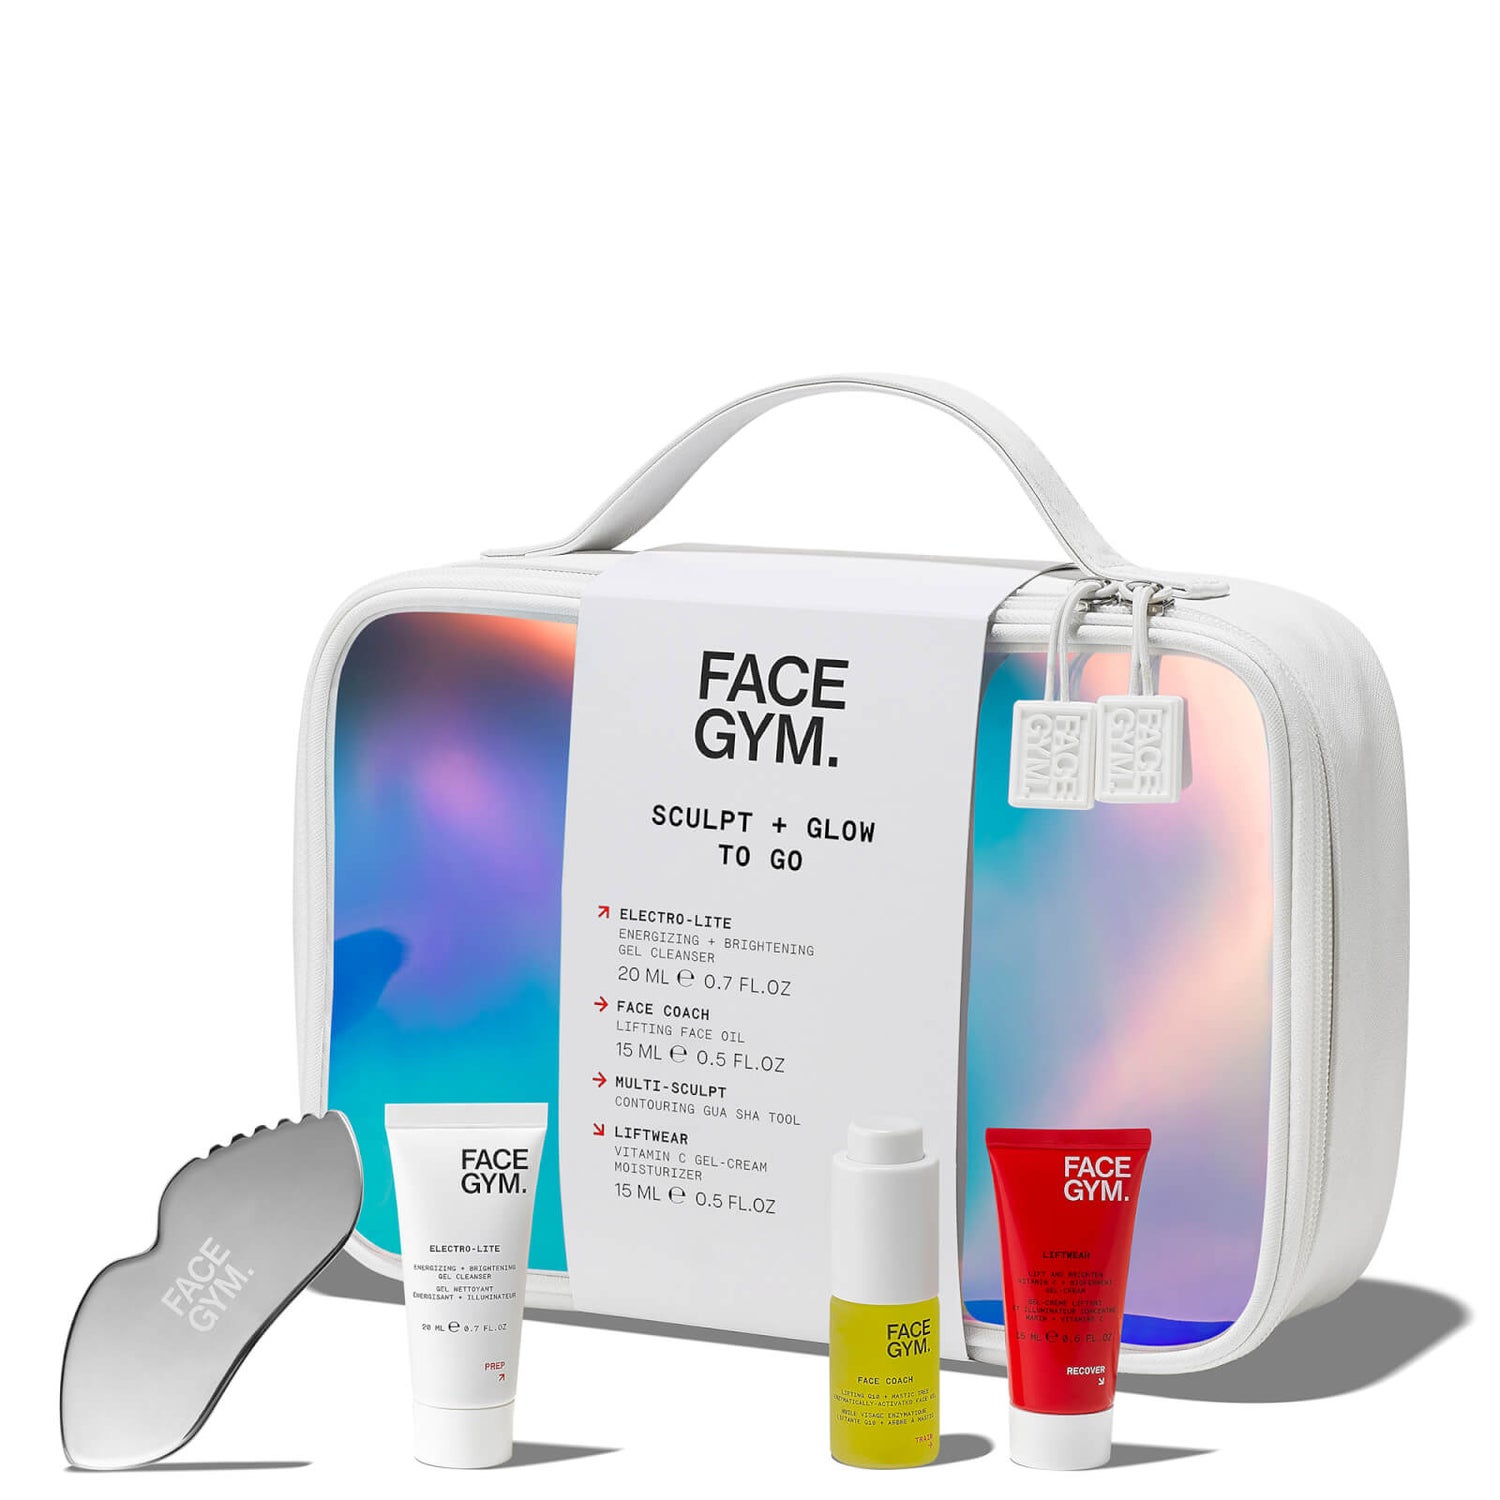 FaceGym Sculpt and Glow to Go Set (Worth £95.00)